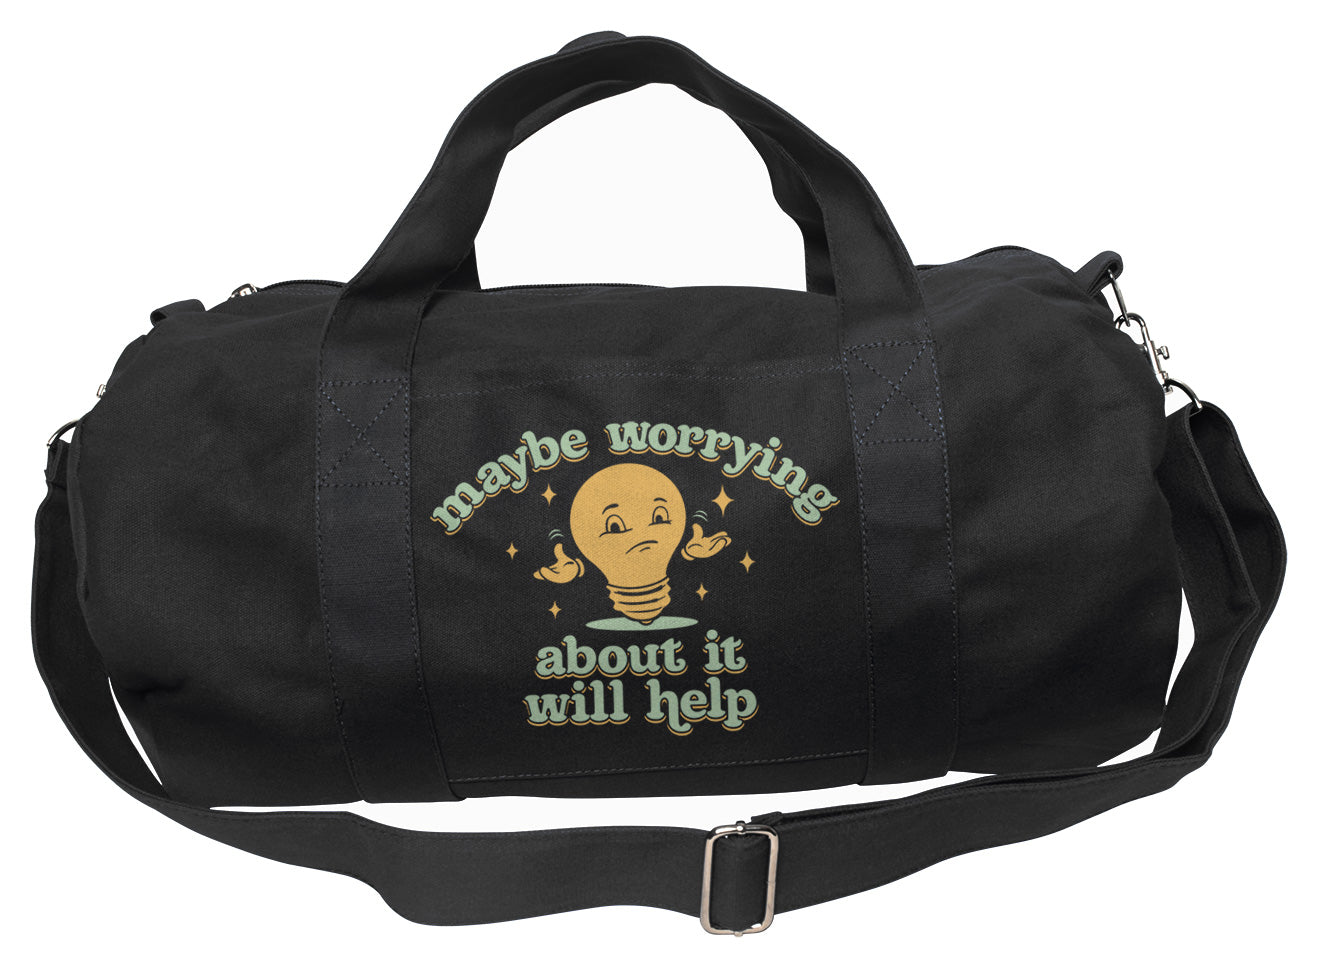 Maybe Worrying About It Will Help Anxiety Duffel Bag